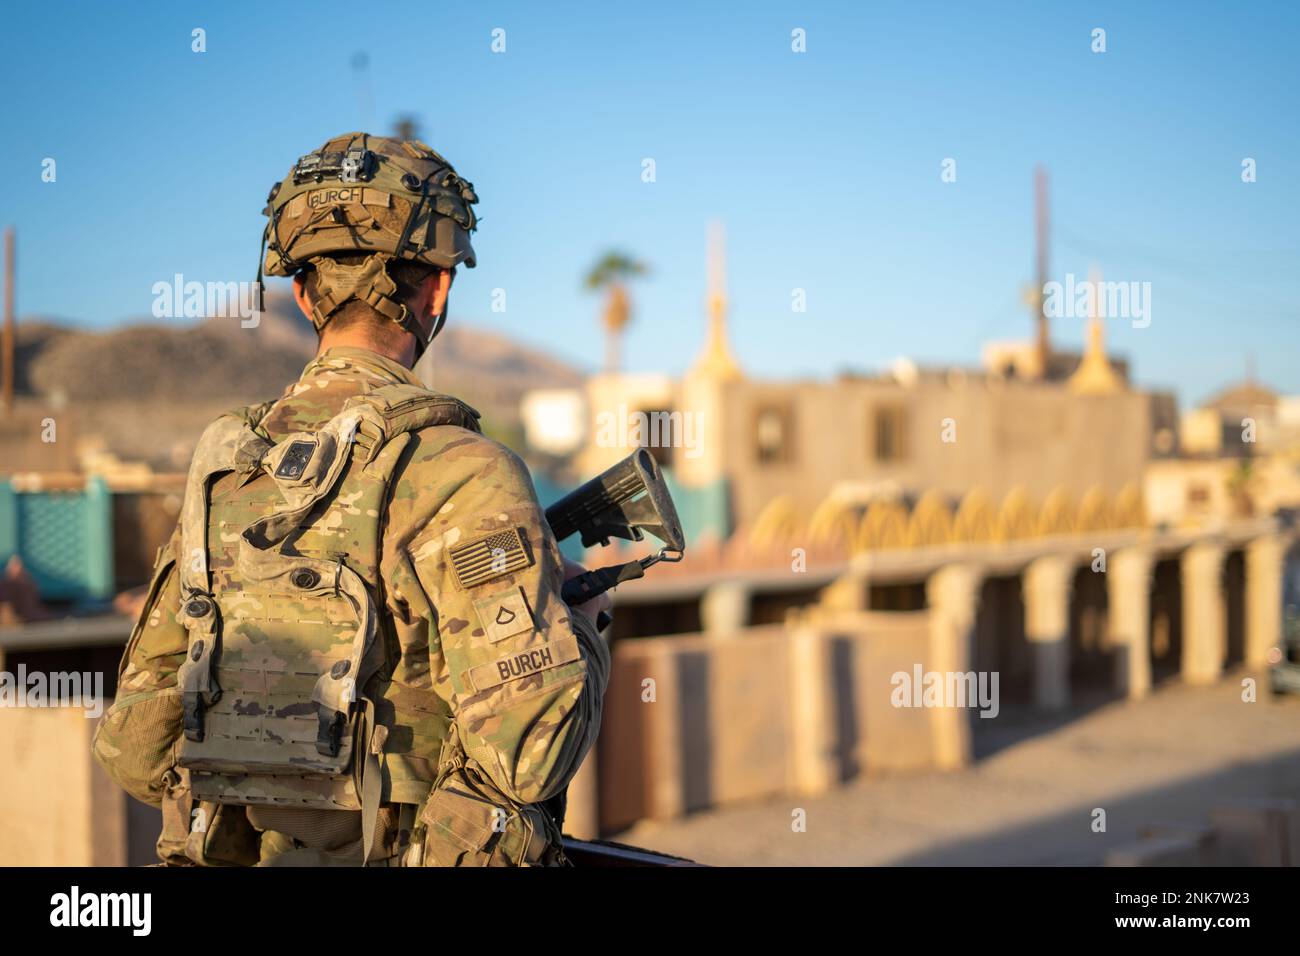 A U.S. Soldiers assigned to 1st Battalion, 63rd Armor Regiment, 2nd Armored Brigade Combat Team, 1st Infantry Division provides security and over watch during Decisive Action Rotation 22-09 at the National Training Center, Fort Irwin, Calif., Aug 11th, 2022. Stock Photo